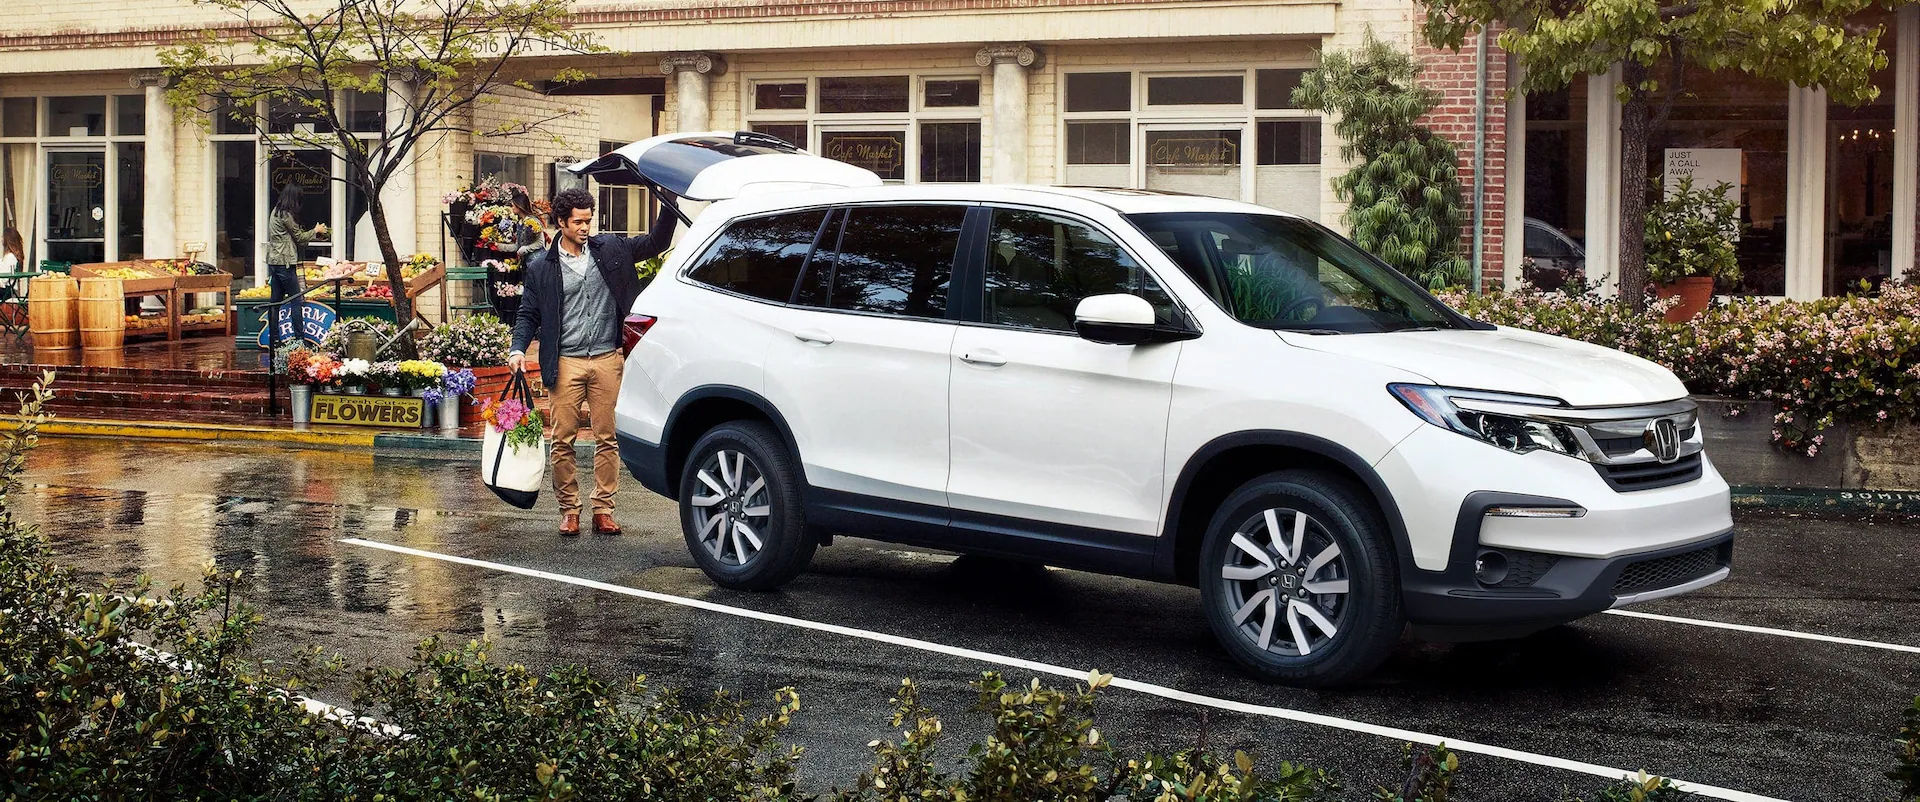 The 2022 Honda Pilot is one of the best midsize SUVs added to the 2022 Honda lineup in Louisville Honda World in Forest Hills, Kentucky.